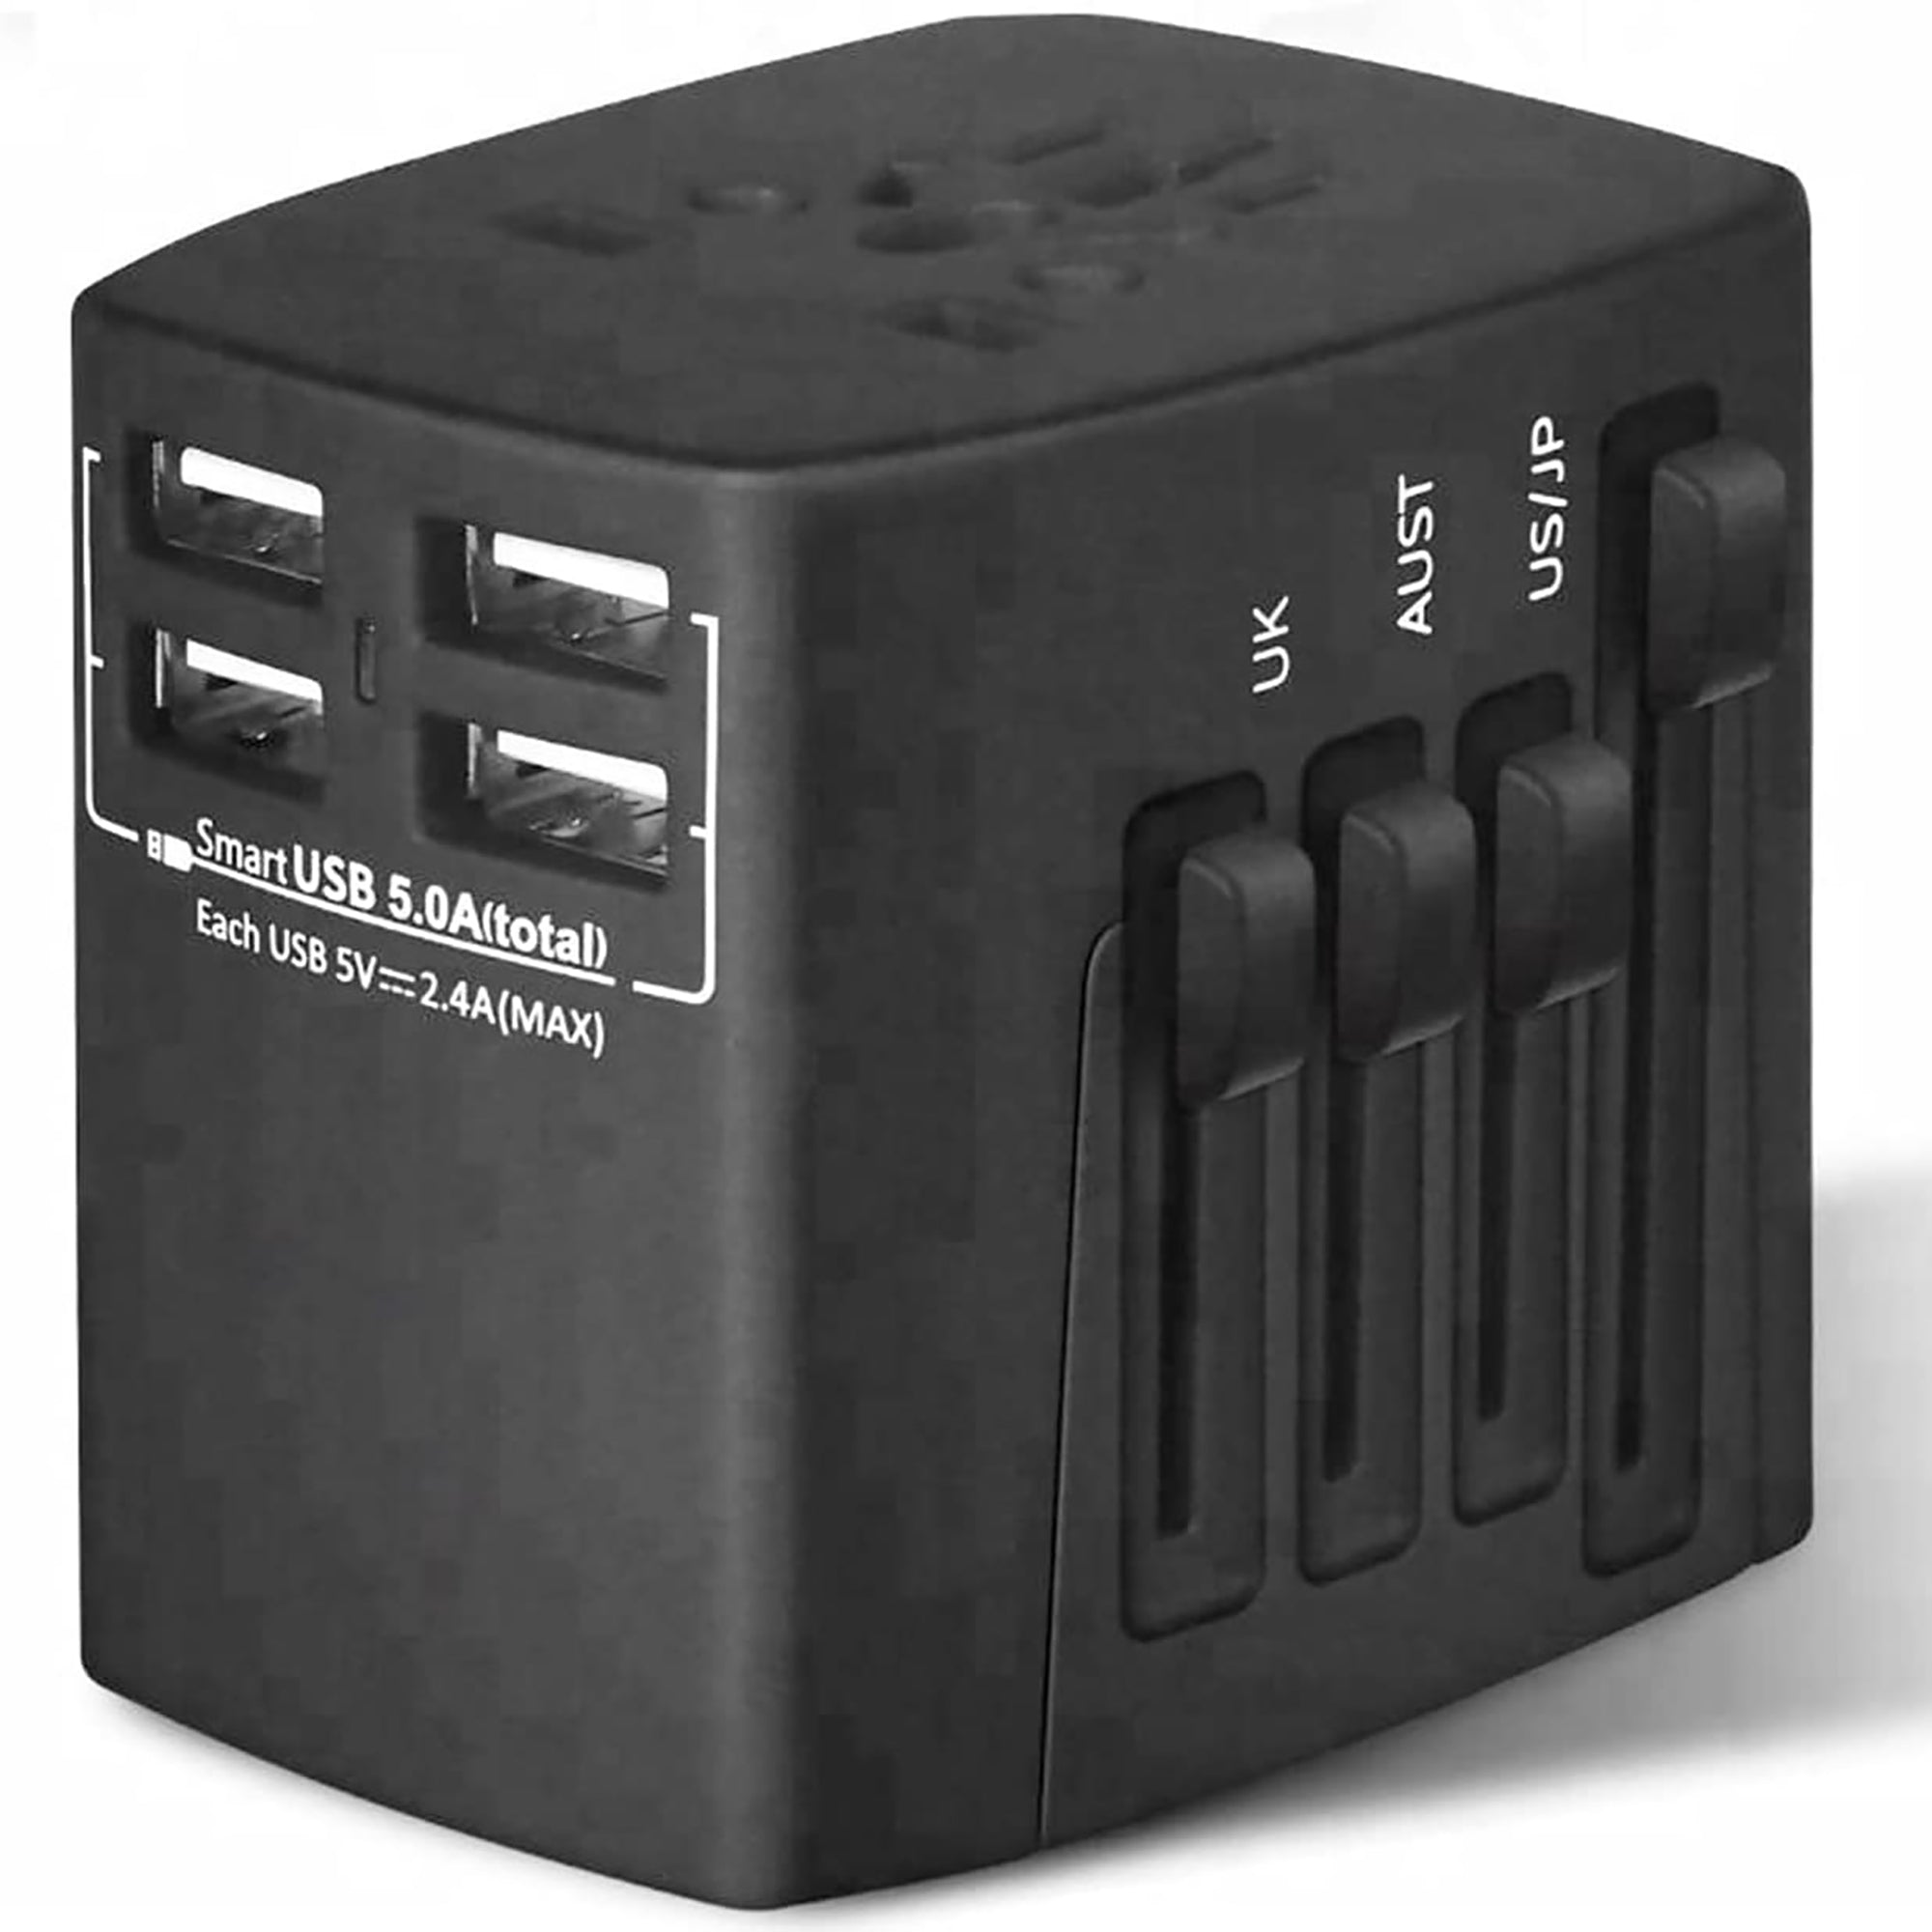 5 Core Travel Adapter 1 Piece Black International Power Adapter Plug Multi Outlet Port 4 USB Travel Charger Universal AC Plug Outlet Adapter- UTA B